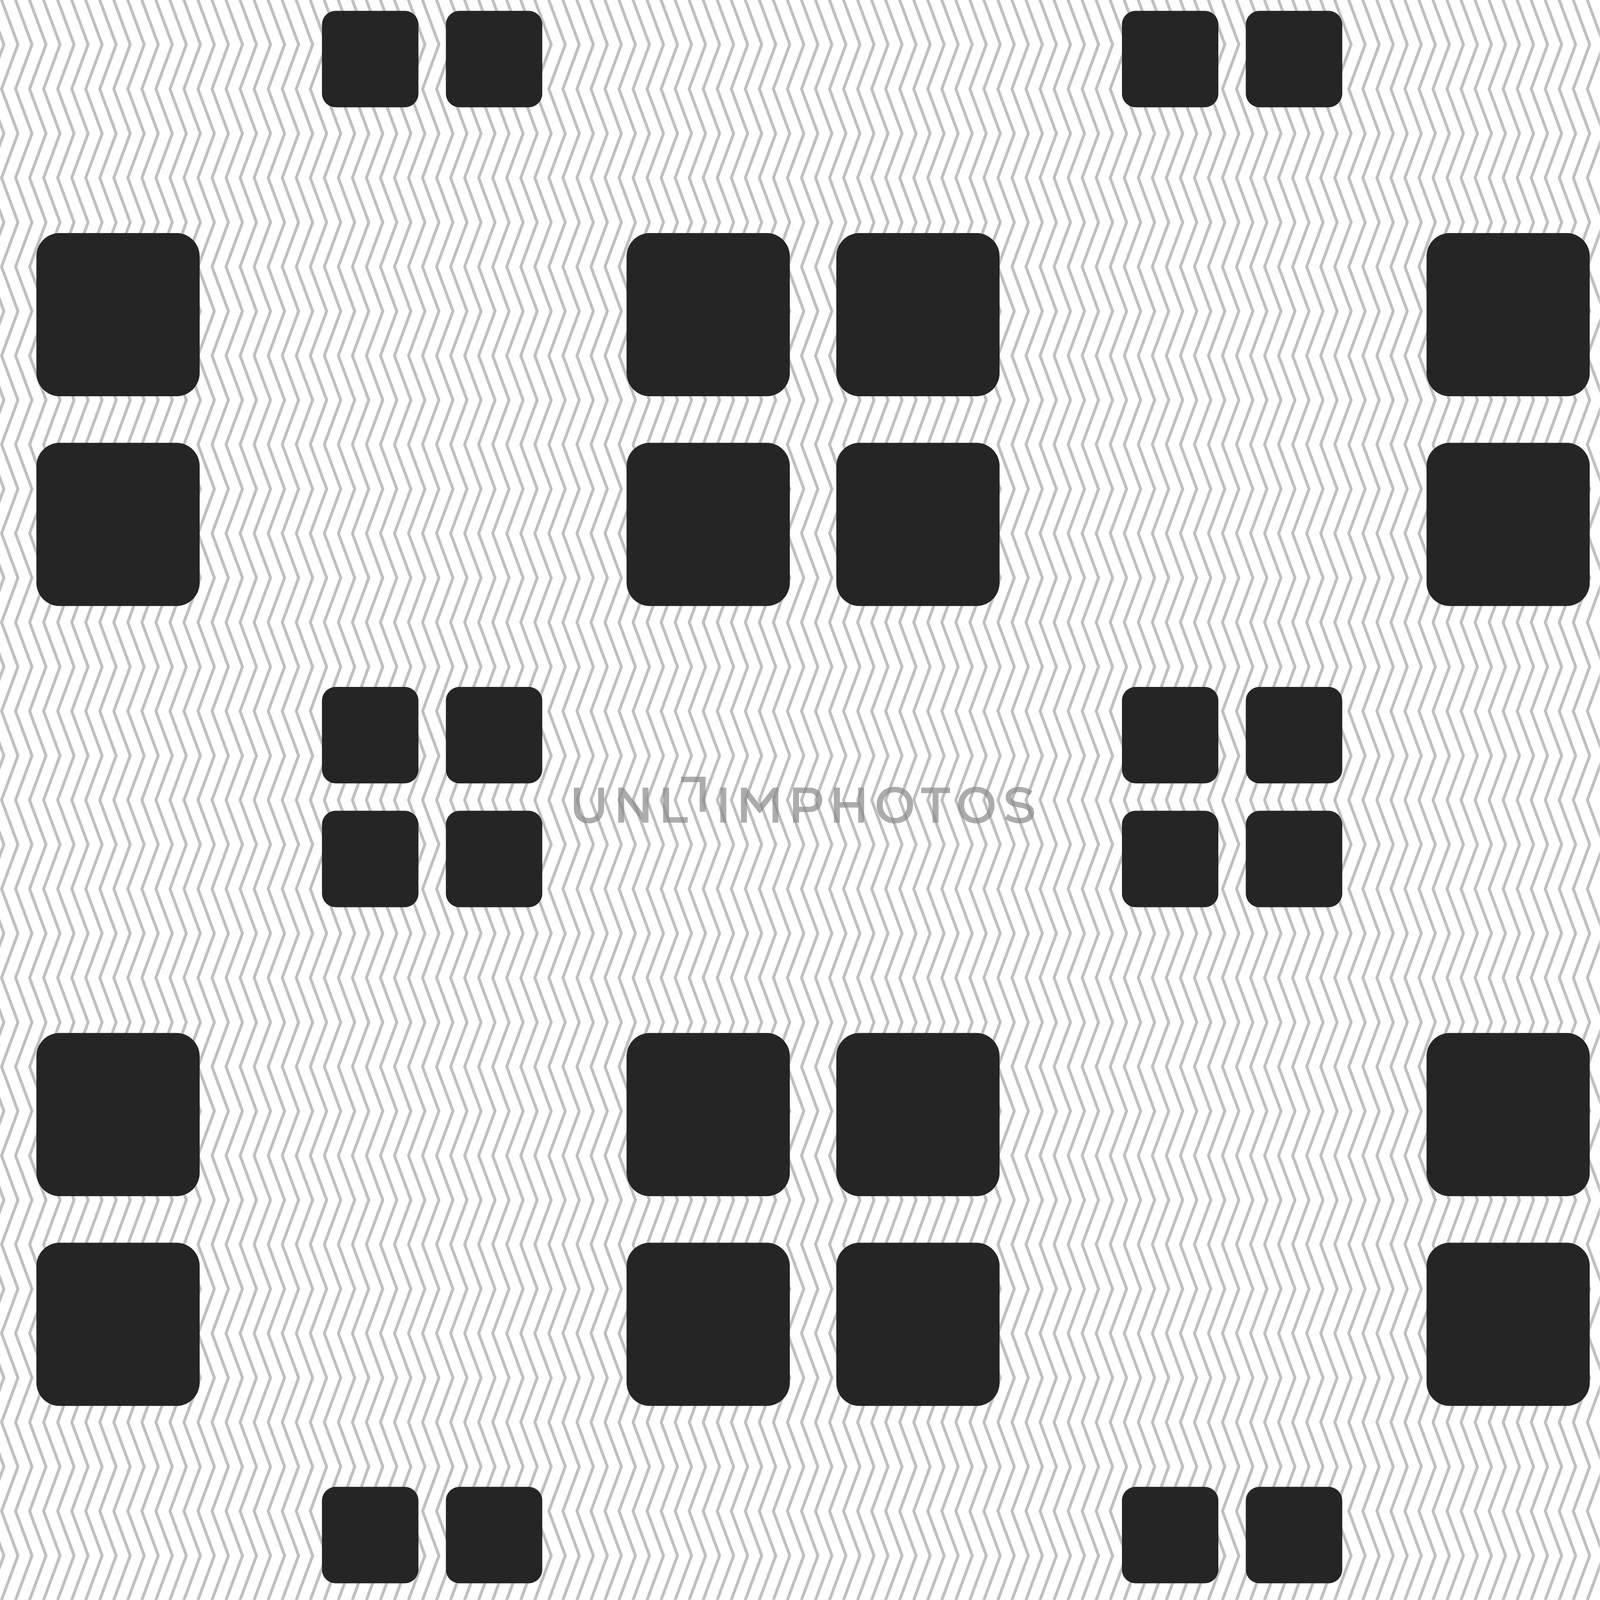 List menu, Content view options icon sign. Seamless pattern with geometric texture. illustration